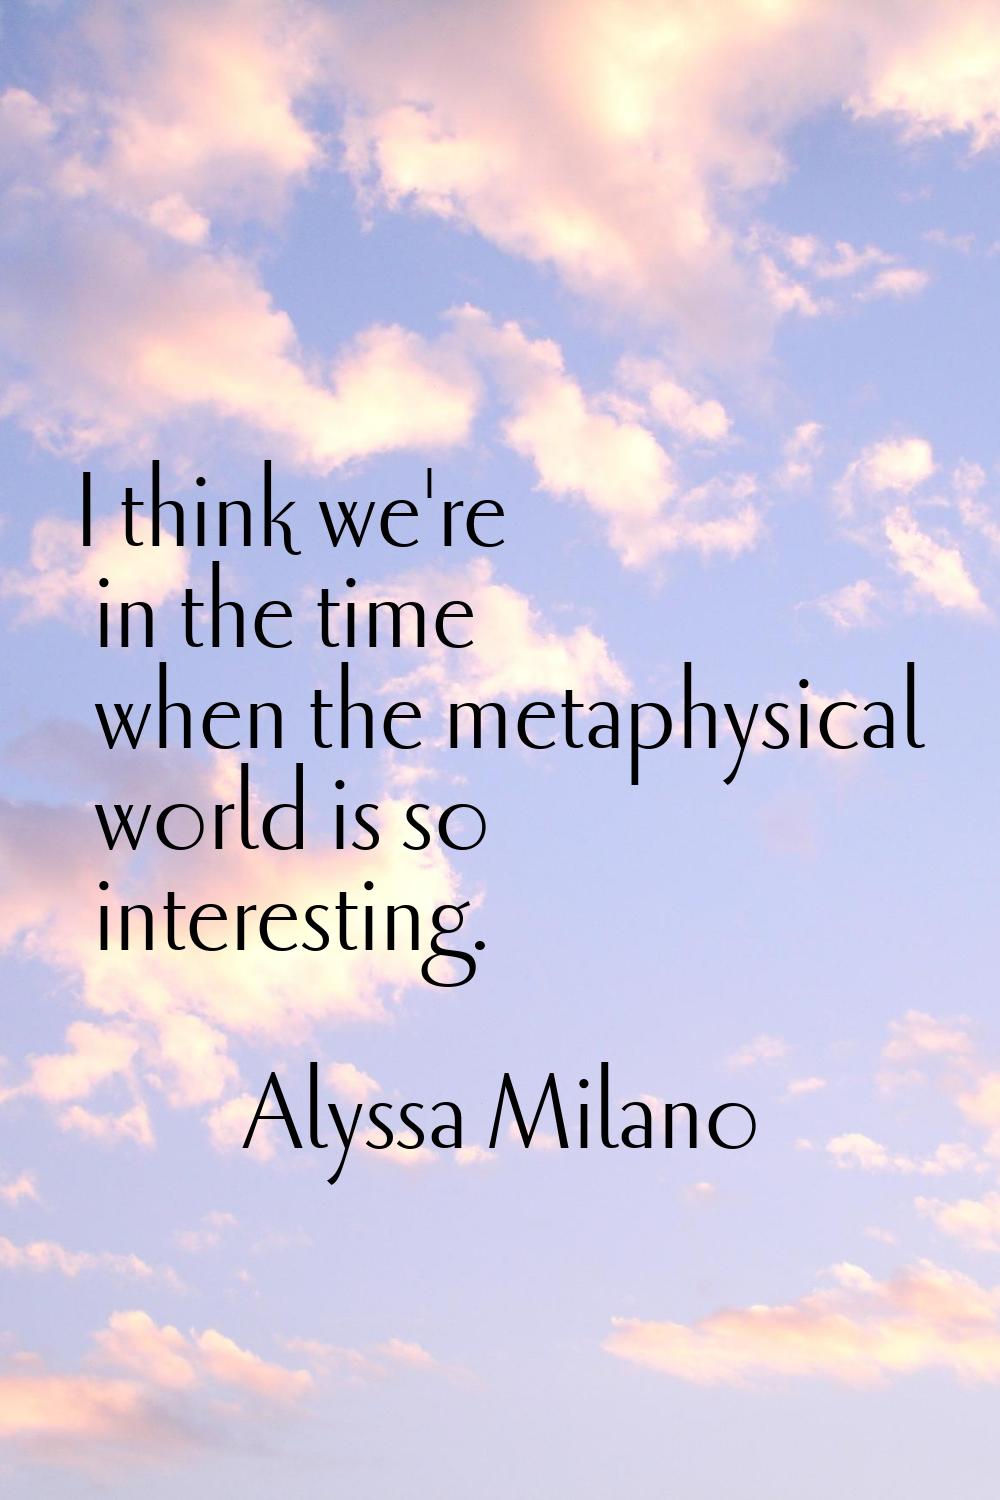 I think we're in the time when the metaphysical world is so interesting.